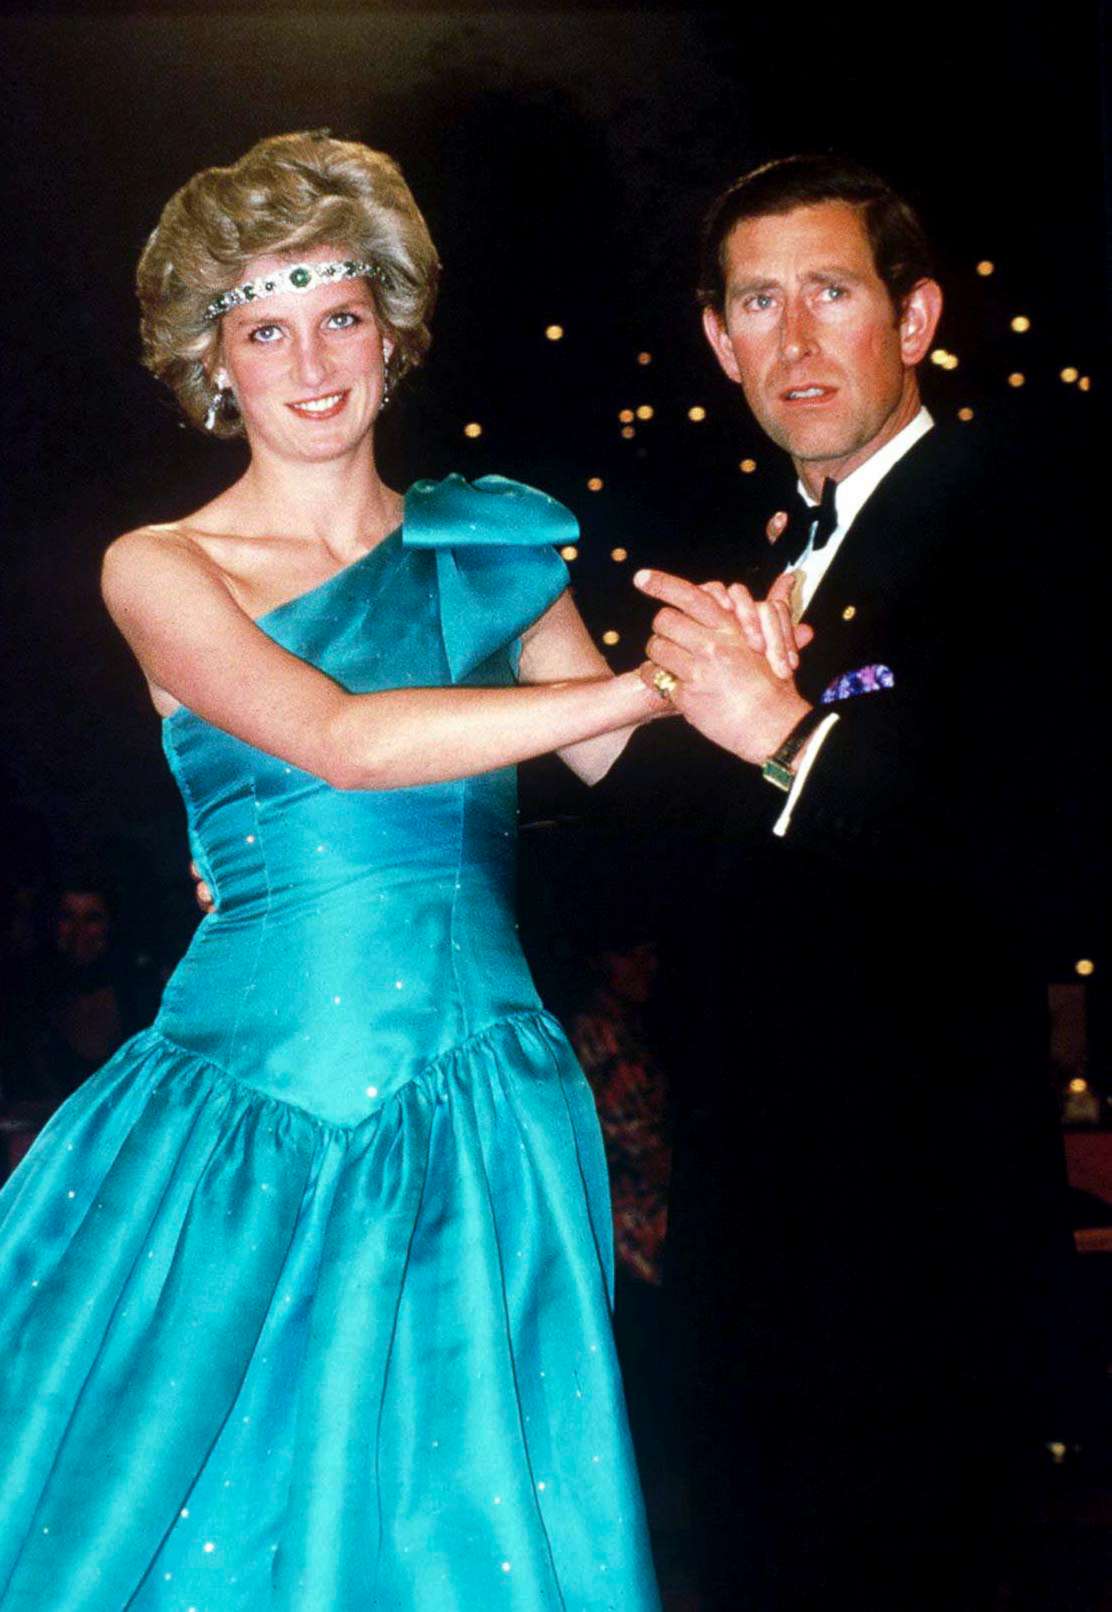 PHOTO: Prince Charles dancing with his wife, Princess Diana, during their official tour of Australia, Oct. 1, 1985, in Melbourne, Australia. 